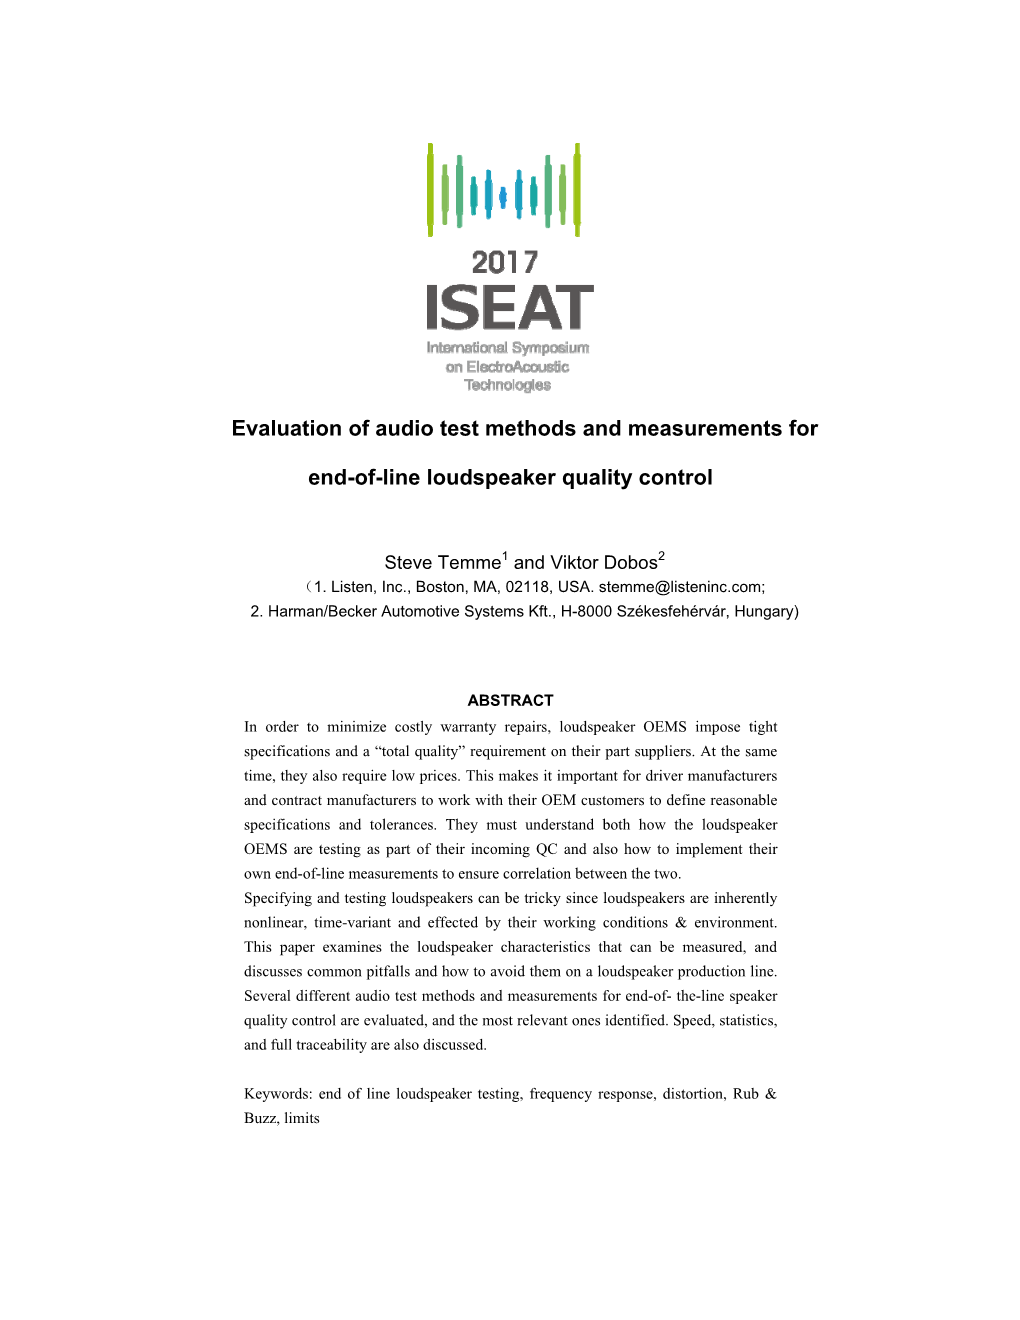 Evaluation of Audio Test Methods and Measurements for End-Of-Line Loudspeaker Quality Control